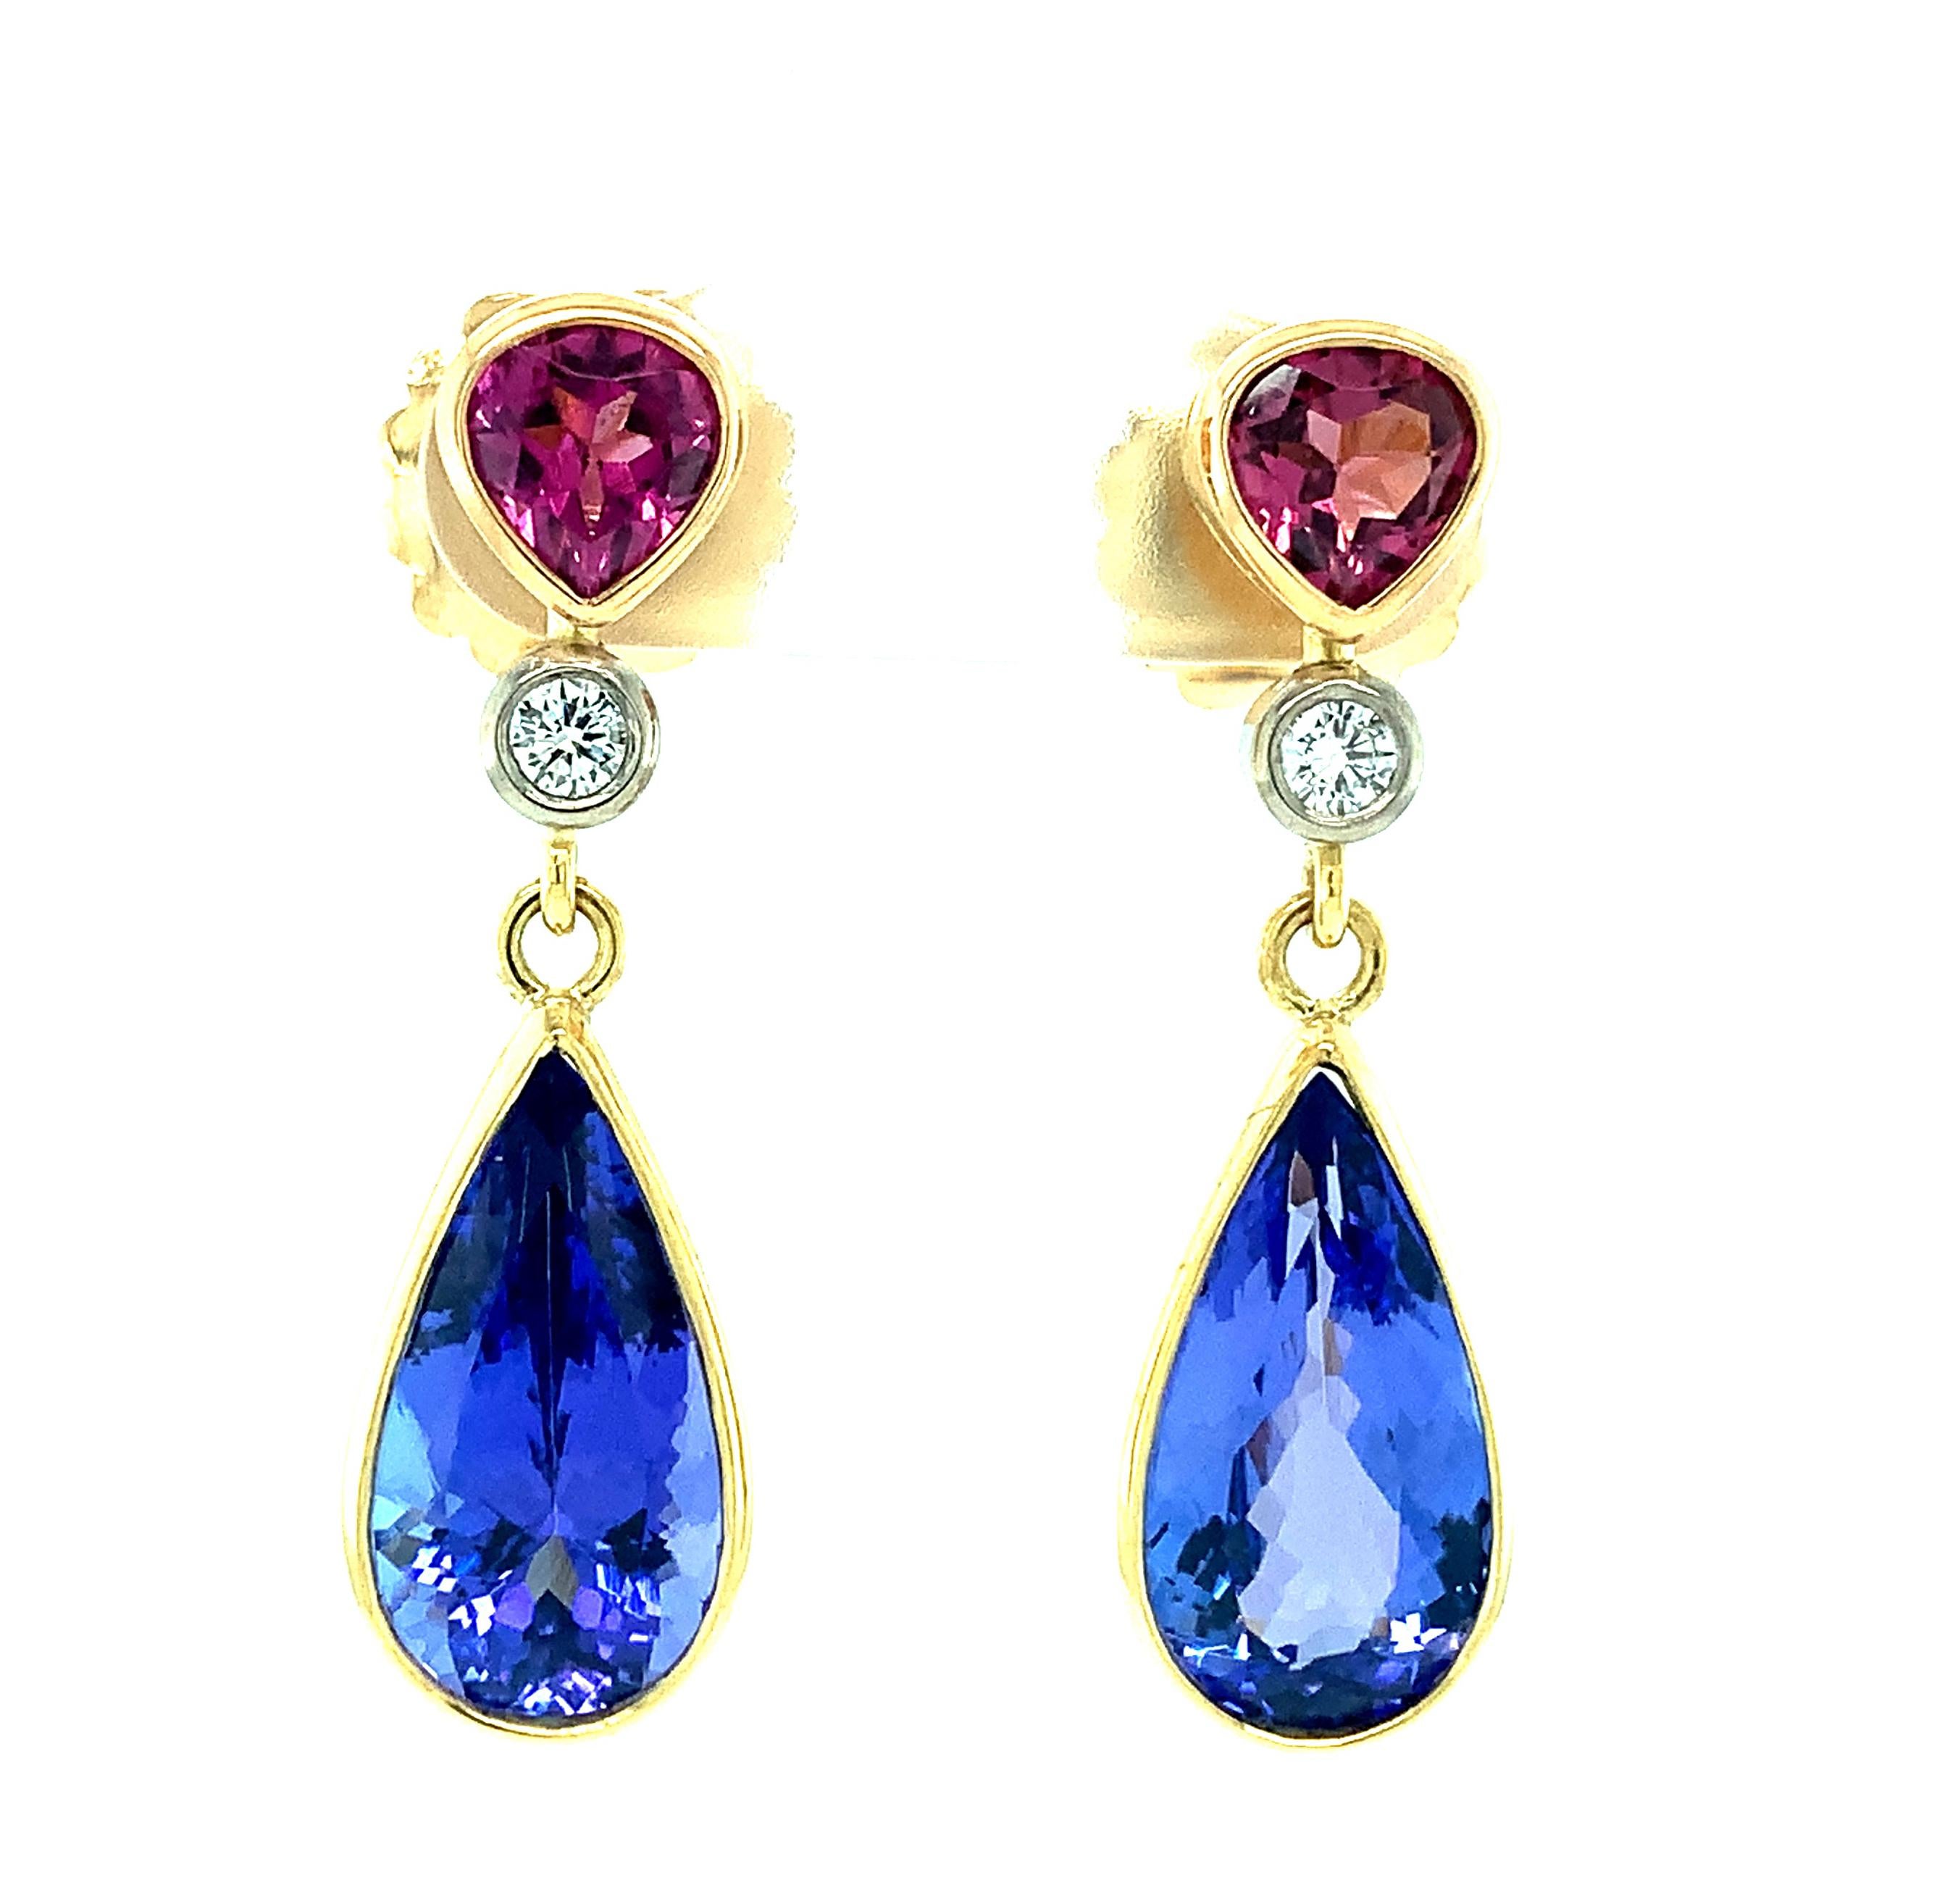 Color, shape and proportion define these beautiful, one-of-a-kind earrings. All stones are bezel set in 18k gold, made by our Master Jewelers in Los Angeles. A large pair of beautifully matched, gem quality tanzanites are featured in these earrings.